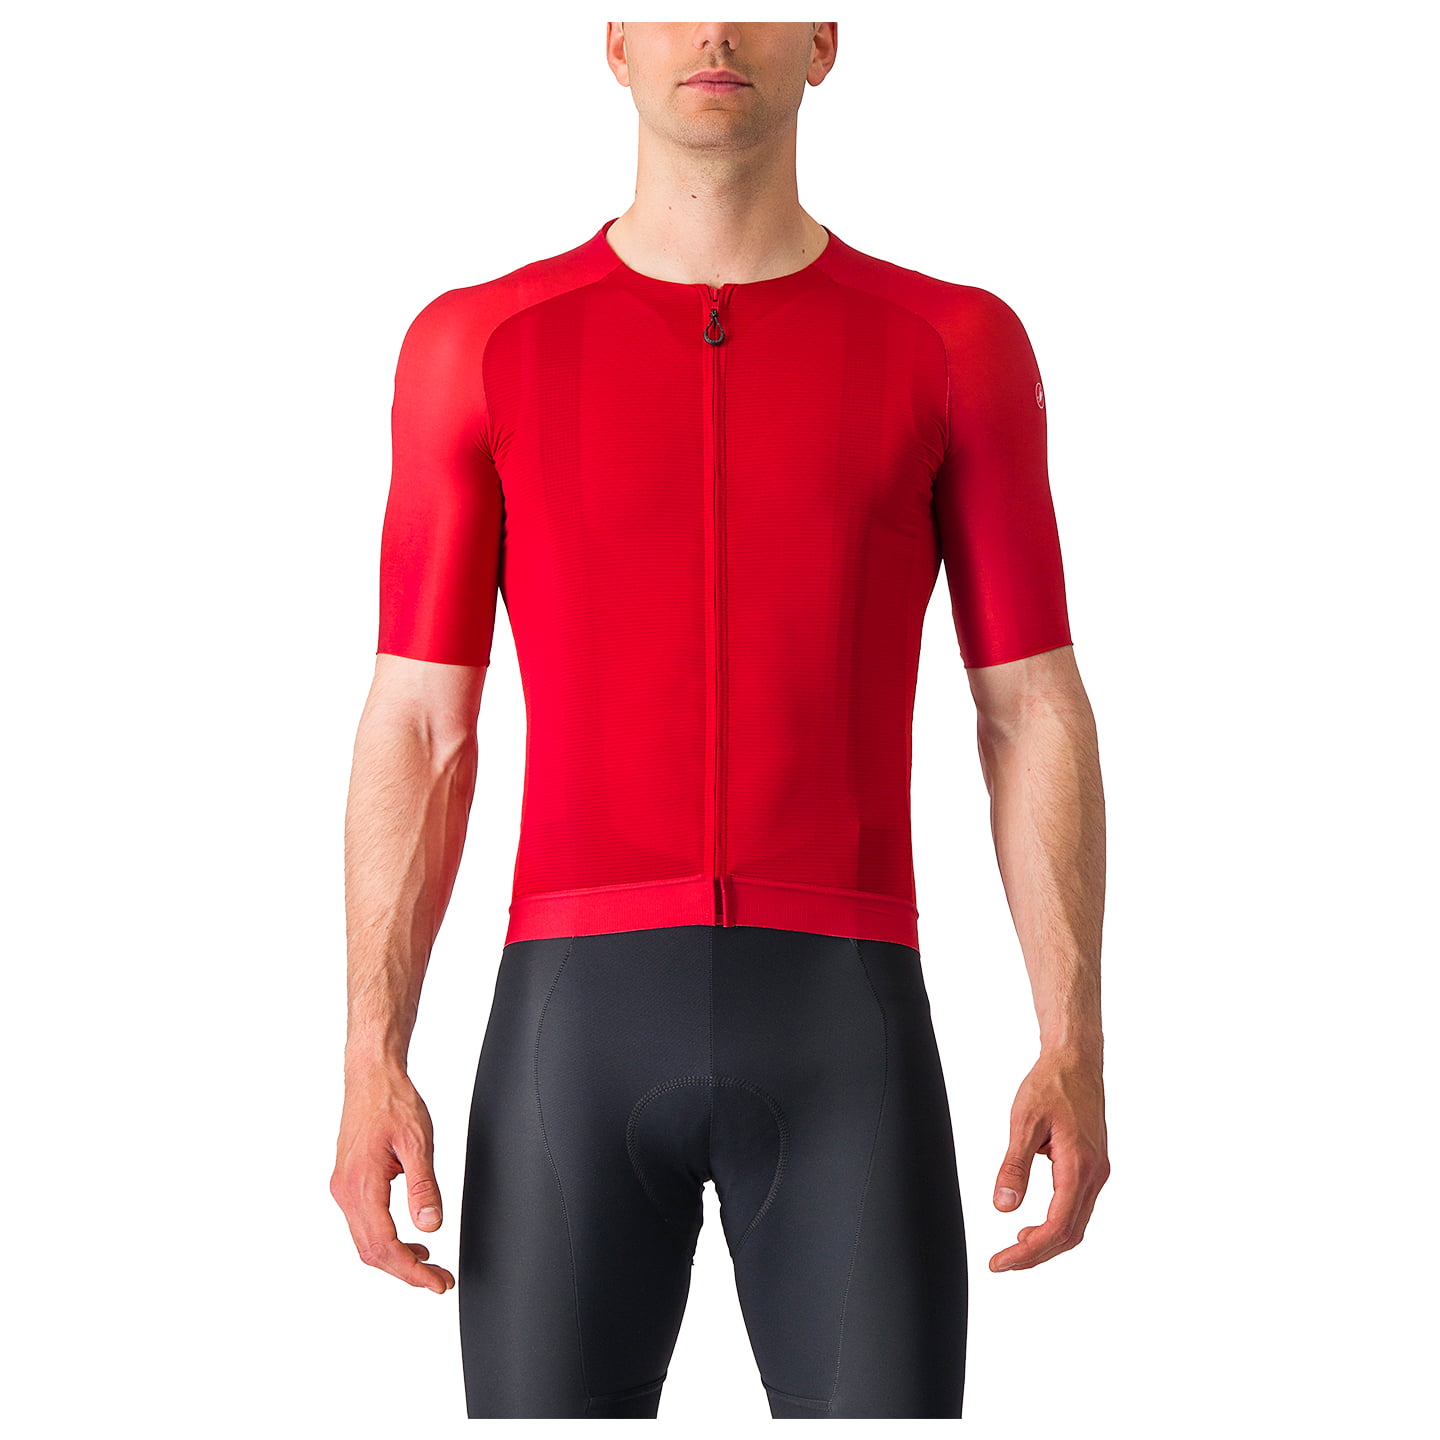 CASTELLI Aero Race 7.0 Short Sleeve Jersey, for men, size S, Cycling jersey, Cycling clothing